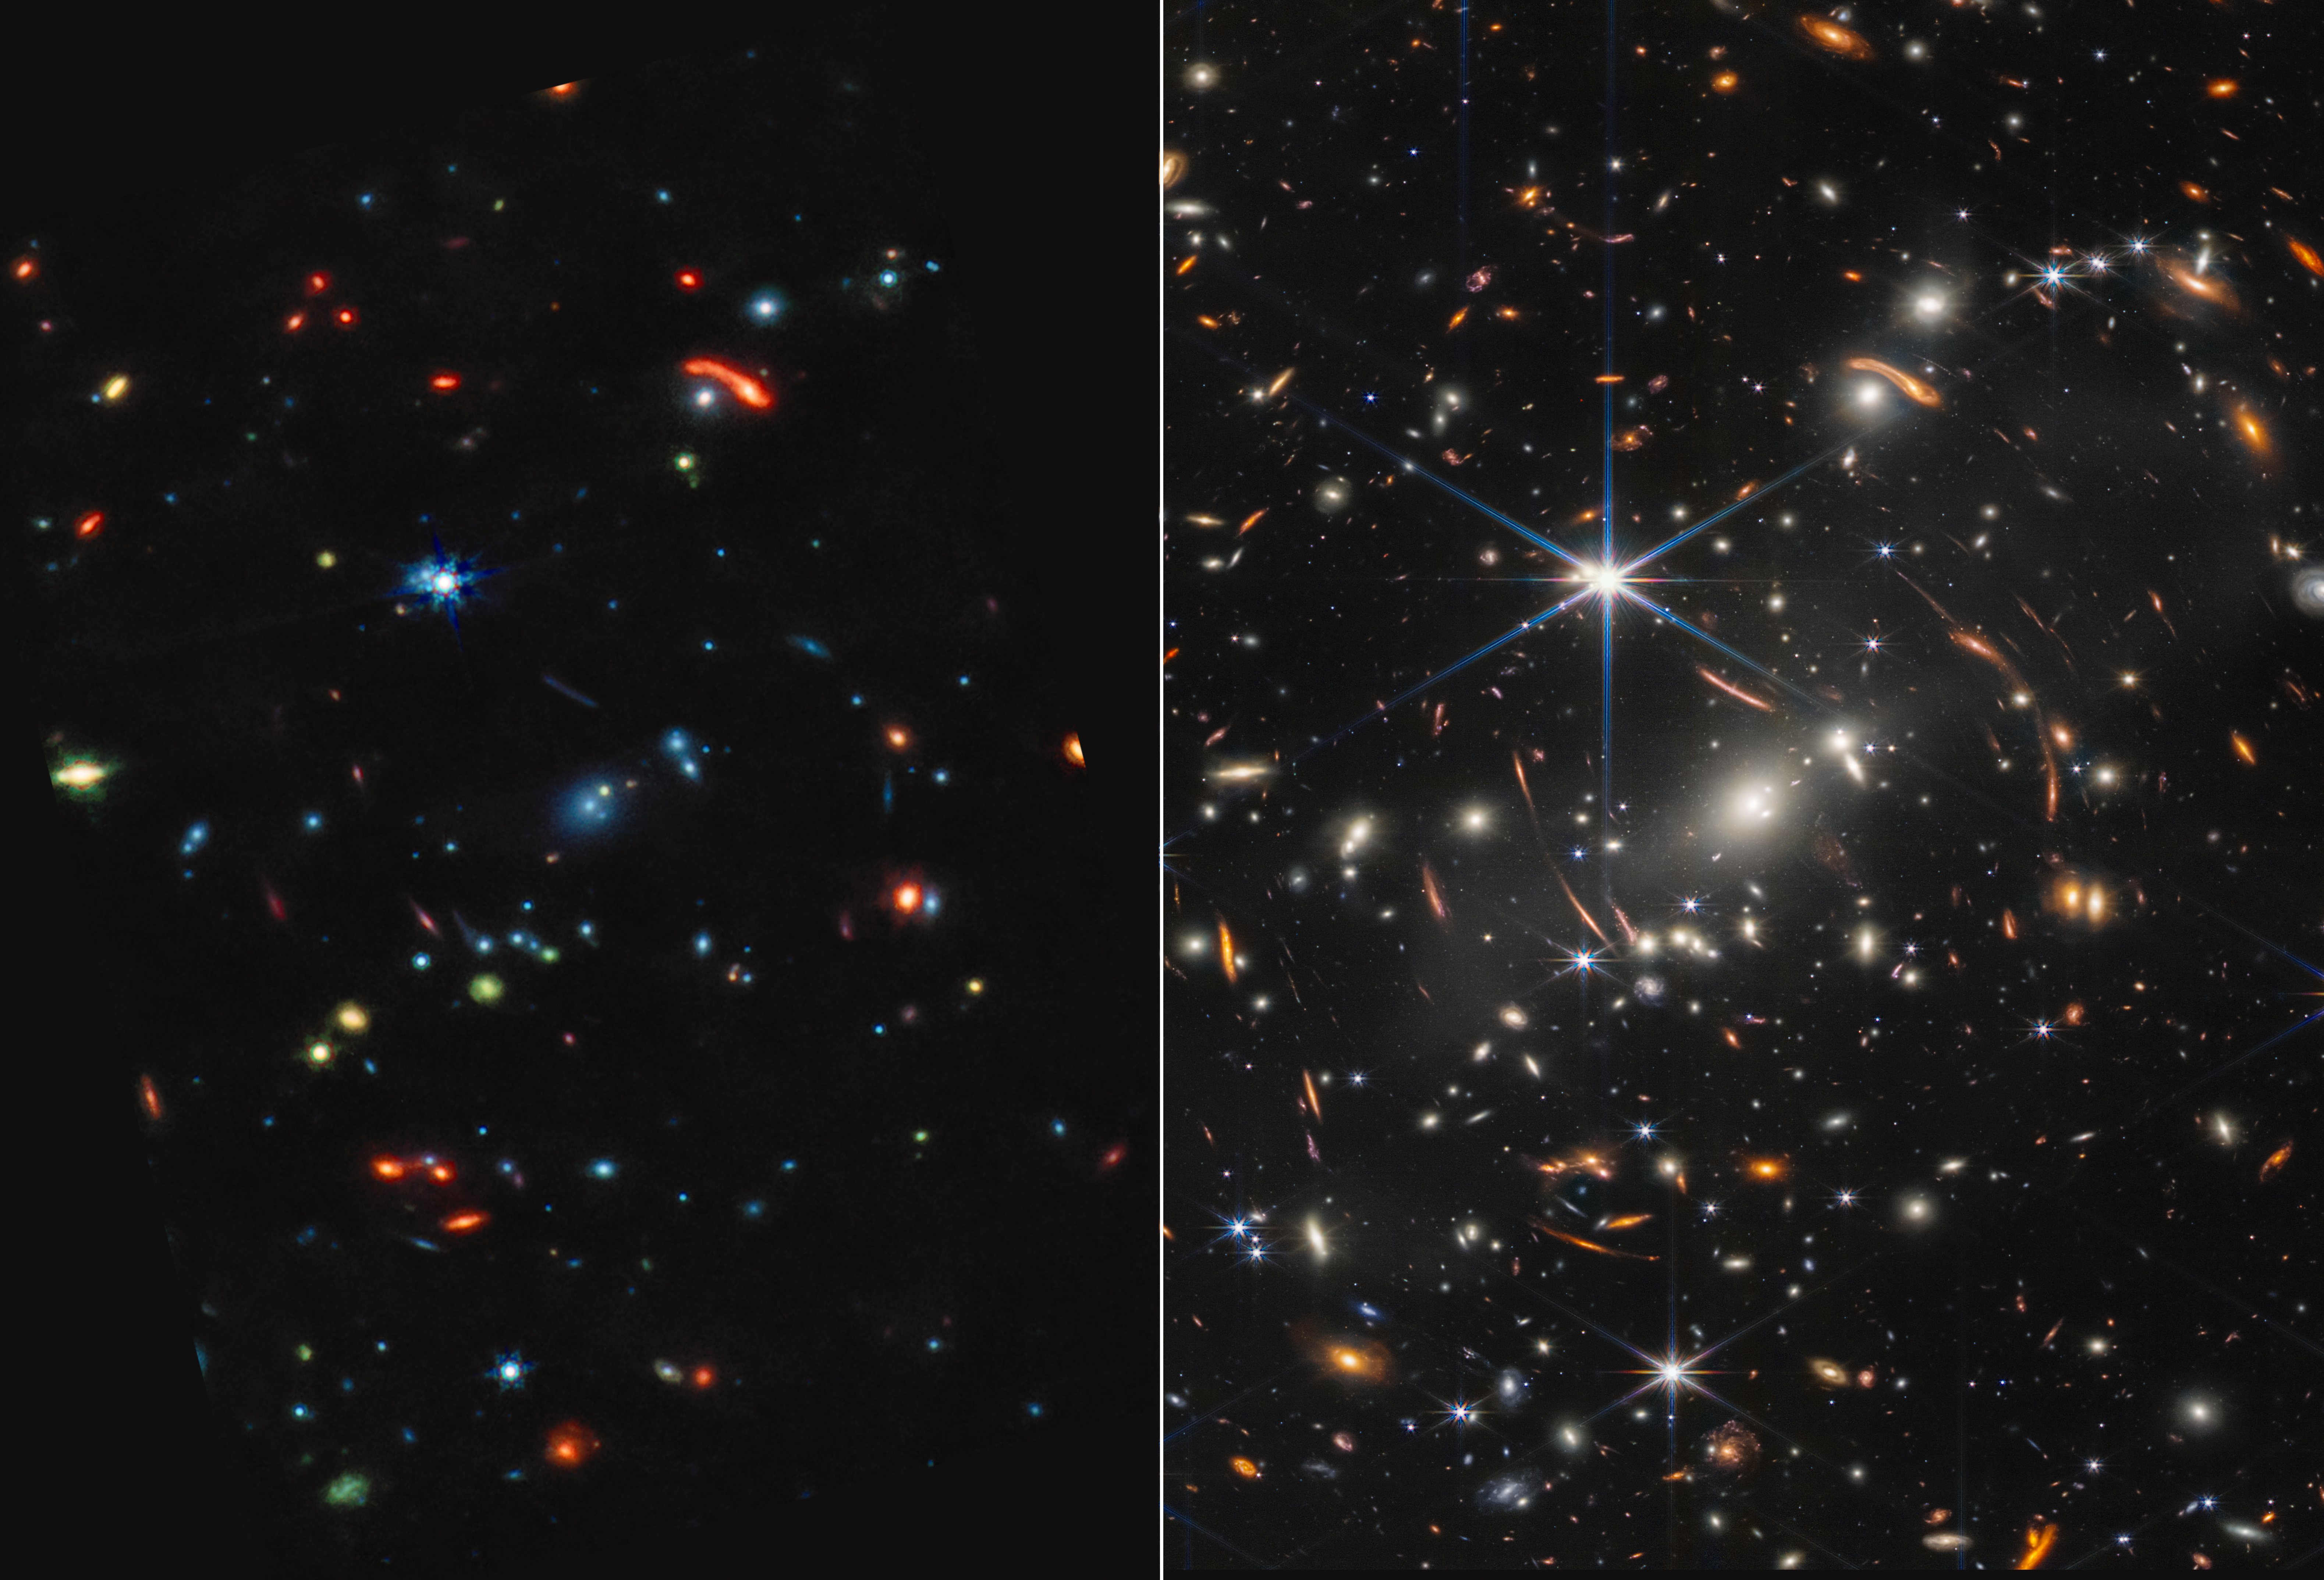 This frame is split down the middle. Webb’s mid-infrared image is shown at left, and Webb’s nearinfrared image on the right. The mid-infrared image appears much darker, with many fewer points of light. Stars have very short diffraction spikes. Galaxies and stars also appear in a range of colors, including blue, green, yellow, and red. The near-infrared image appears busier, with many more points of light. Thousands of galaxies and stars appear all across the view. They are sharper and more distinct than what is seen in the mid-infrared view. Some galaxies are shades of orange, while others are white. Most stars appear blue with long diffraction spikes, forming an eight-pointed star shapes. There are also many thin, long, orange arcs that curve around the center of the image.